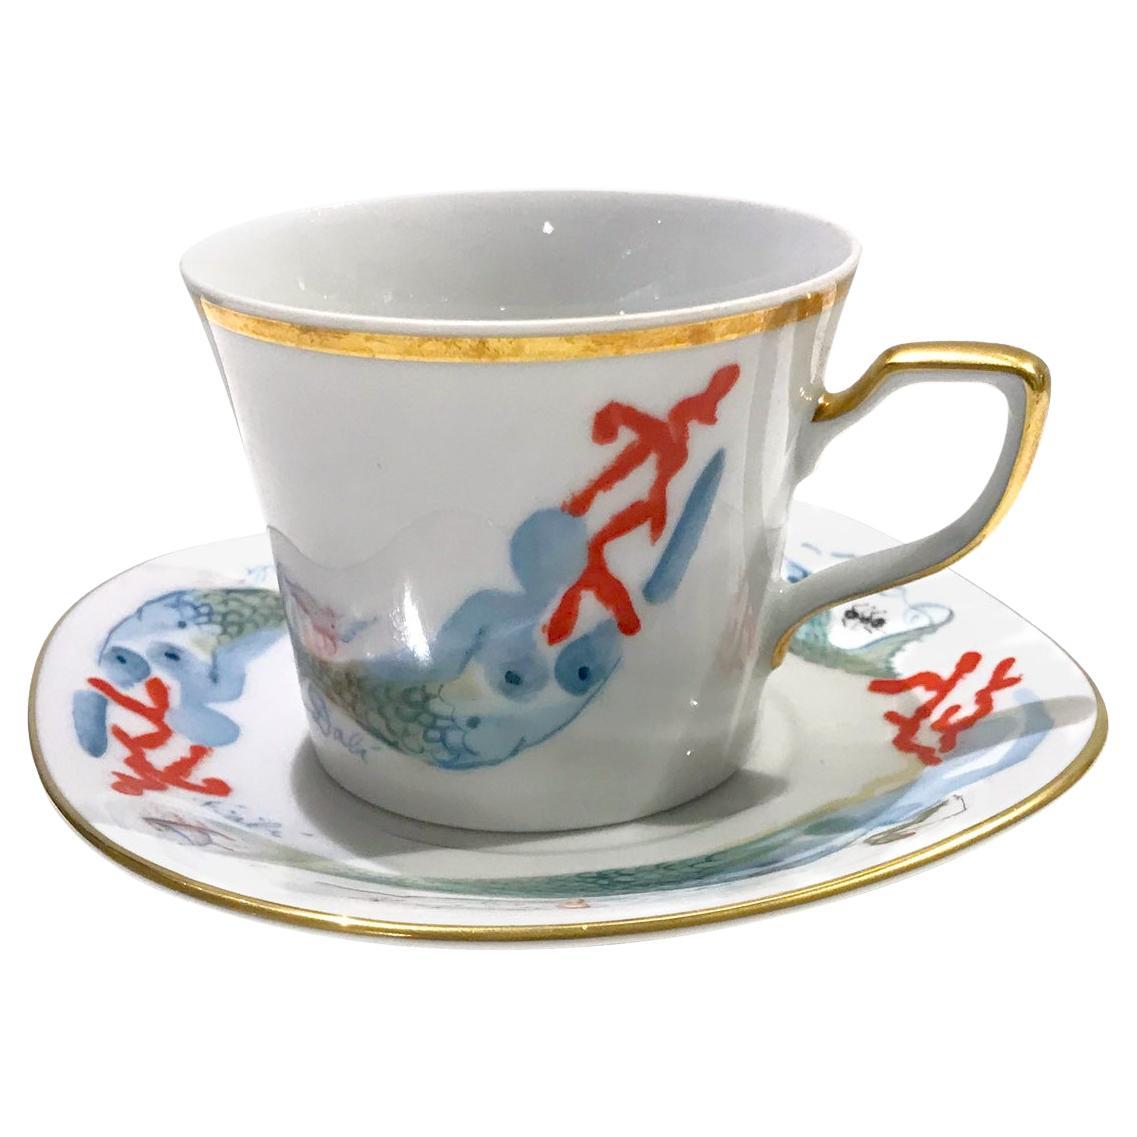 Porcelain Coffee Cup and Saucer "Sirenas" Designed by Dalí, N°520/1000